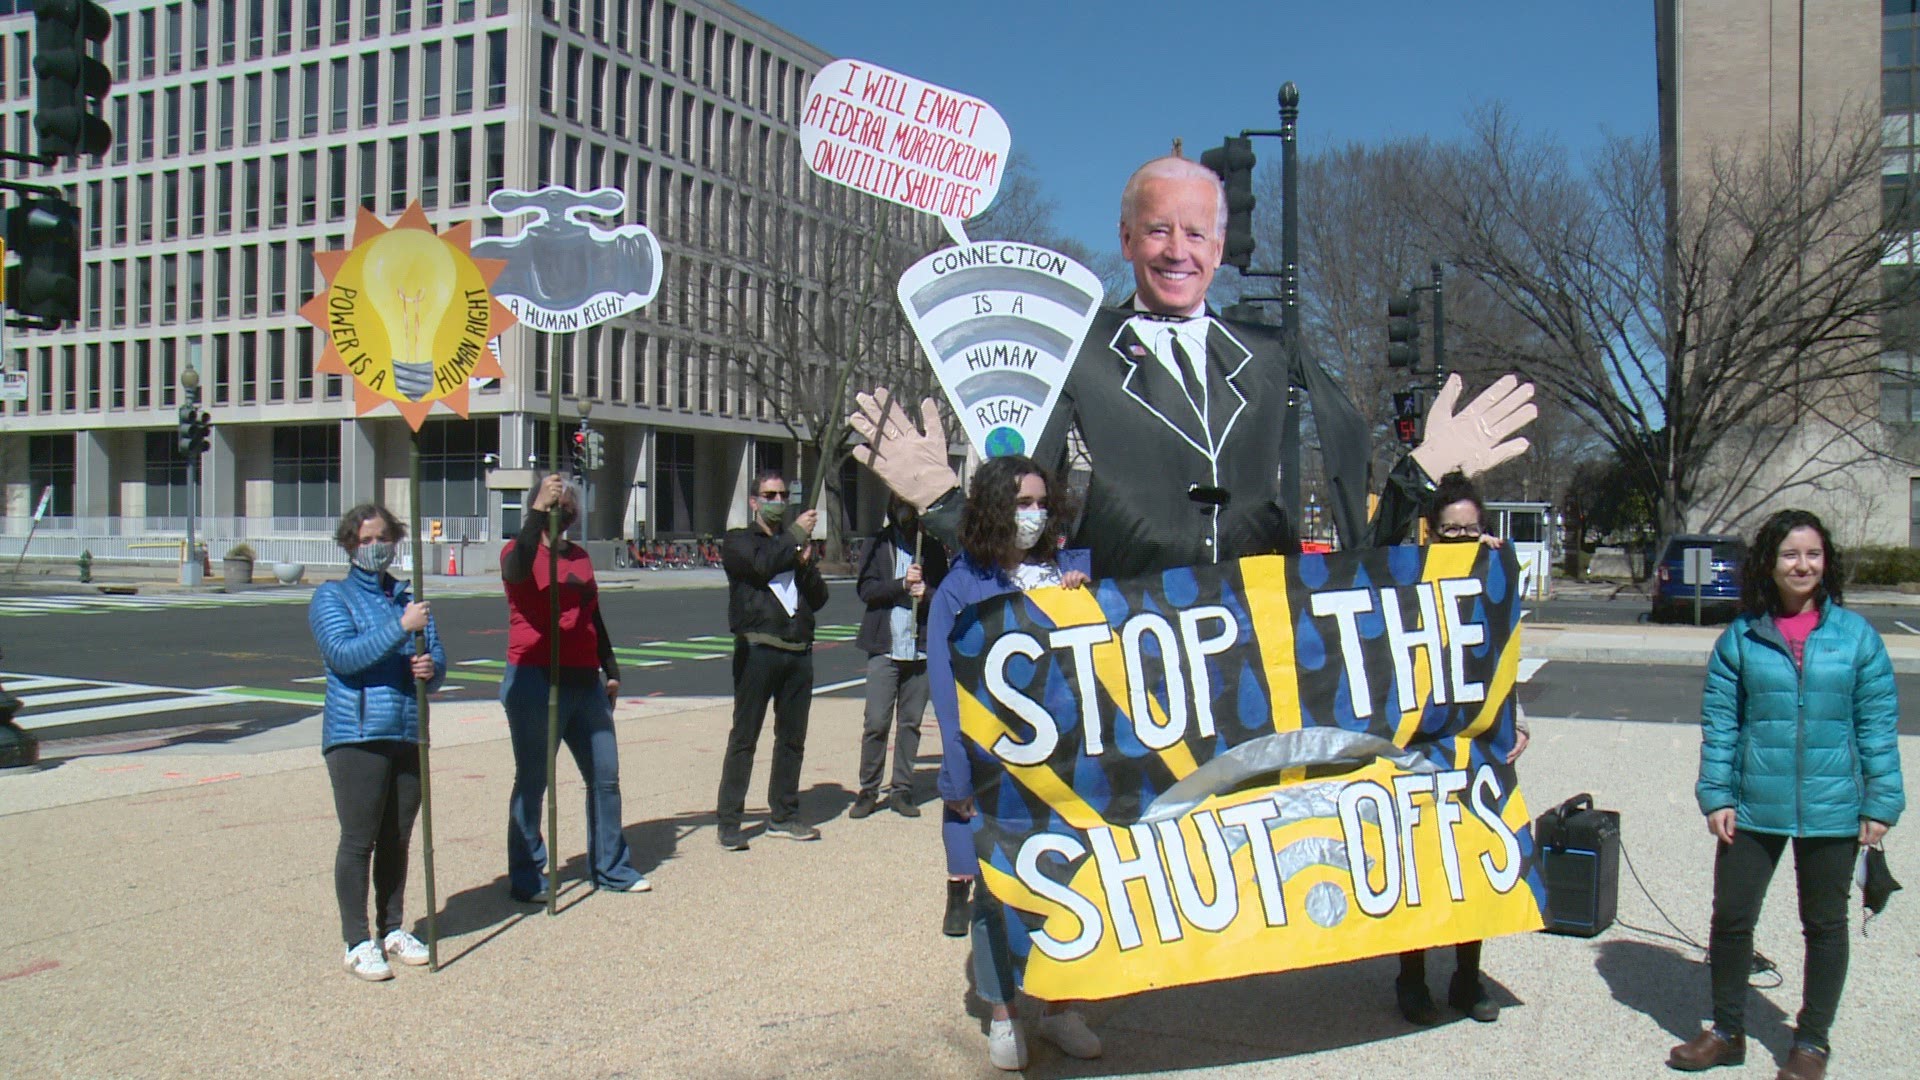 Signs were directed at President Joe Biden about utility shut-offs that have happened to people during the pandemic.